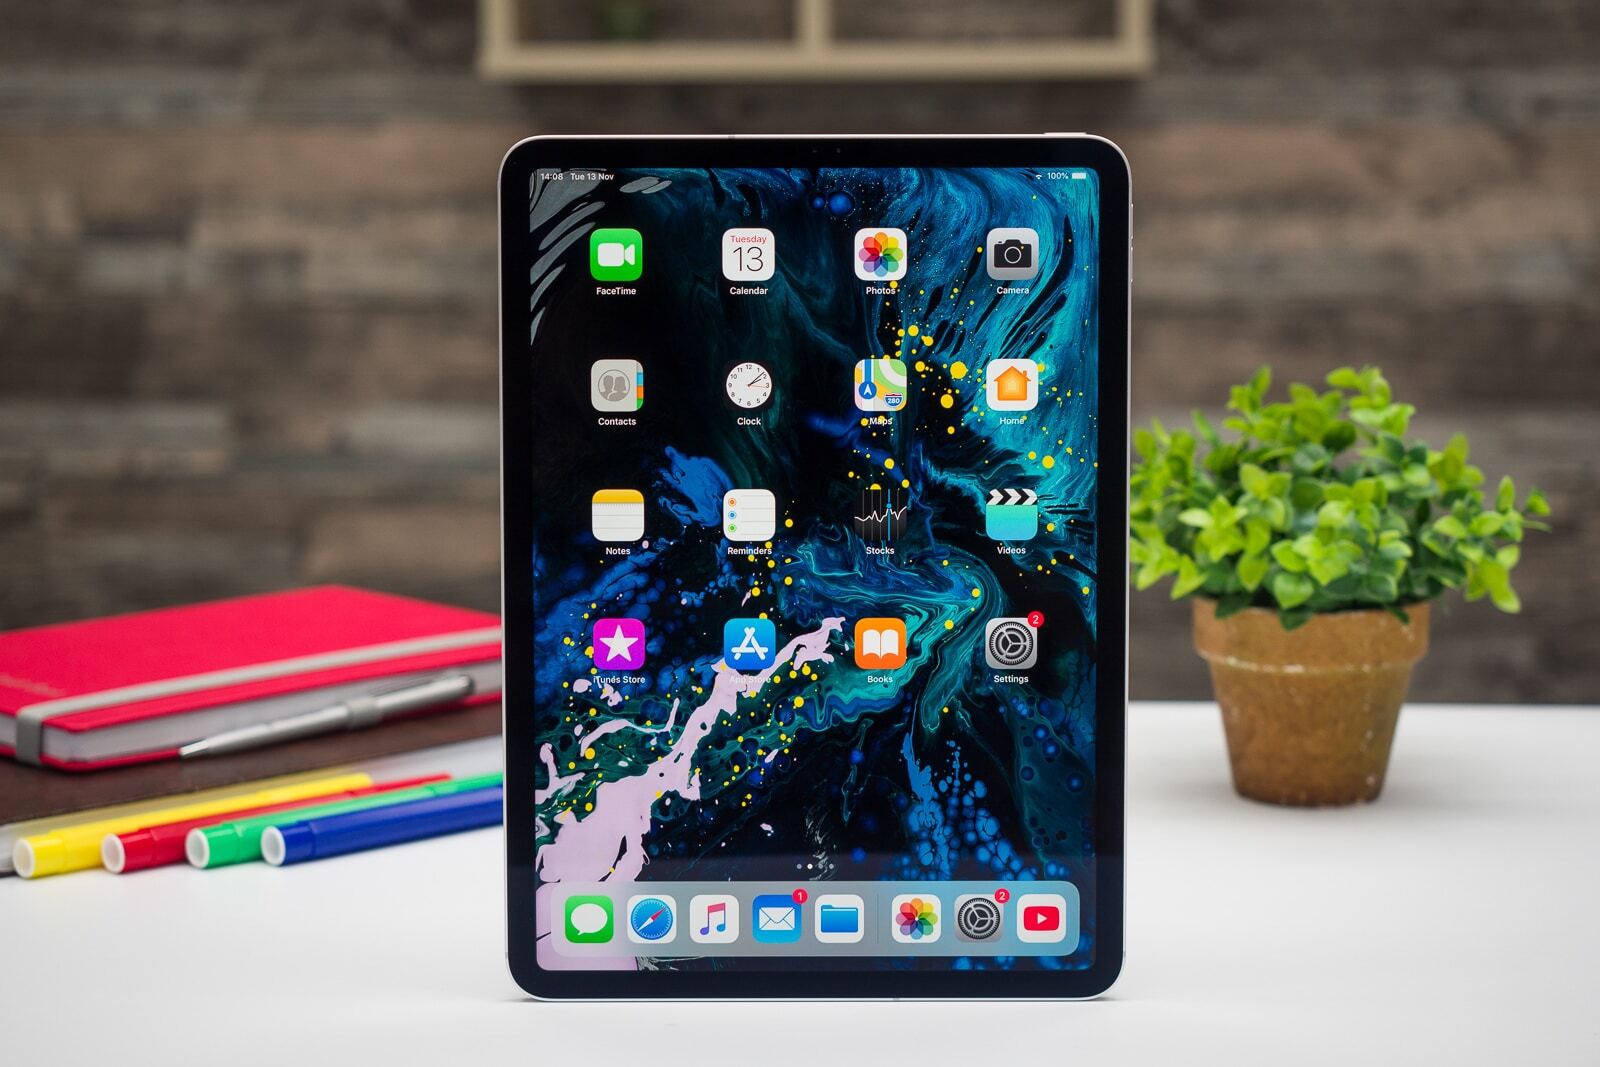 The 2018 iPad Pro - Apple’s 2020 iPad Pro will feature major camera upgrades and a surprise feature